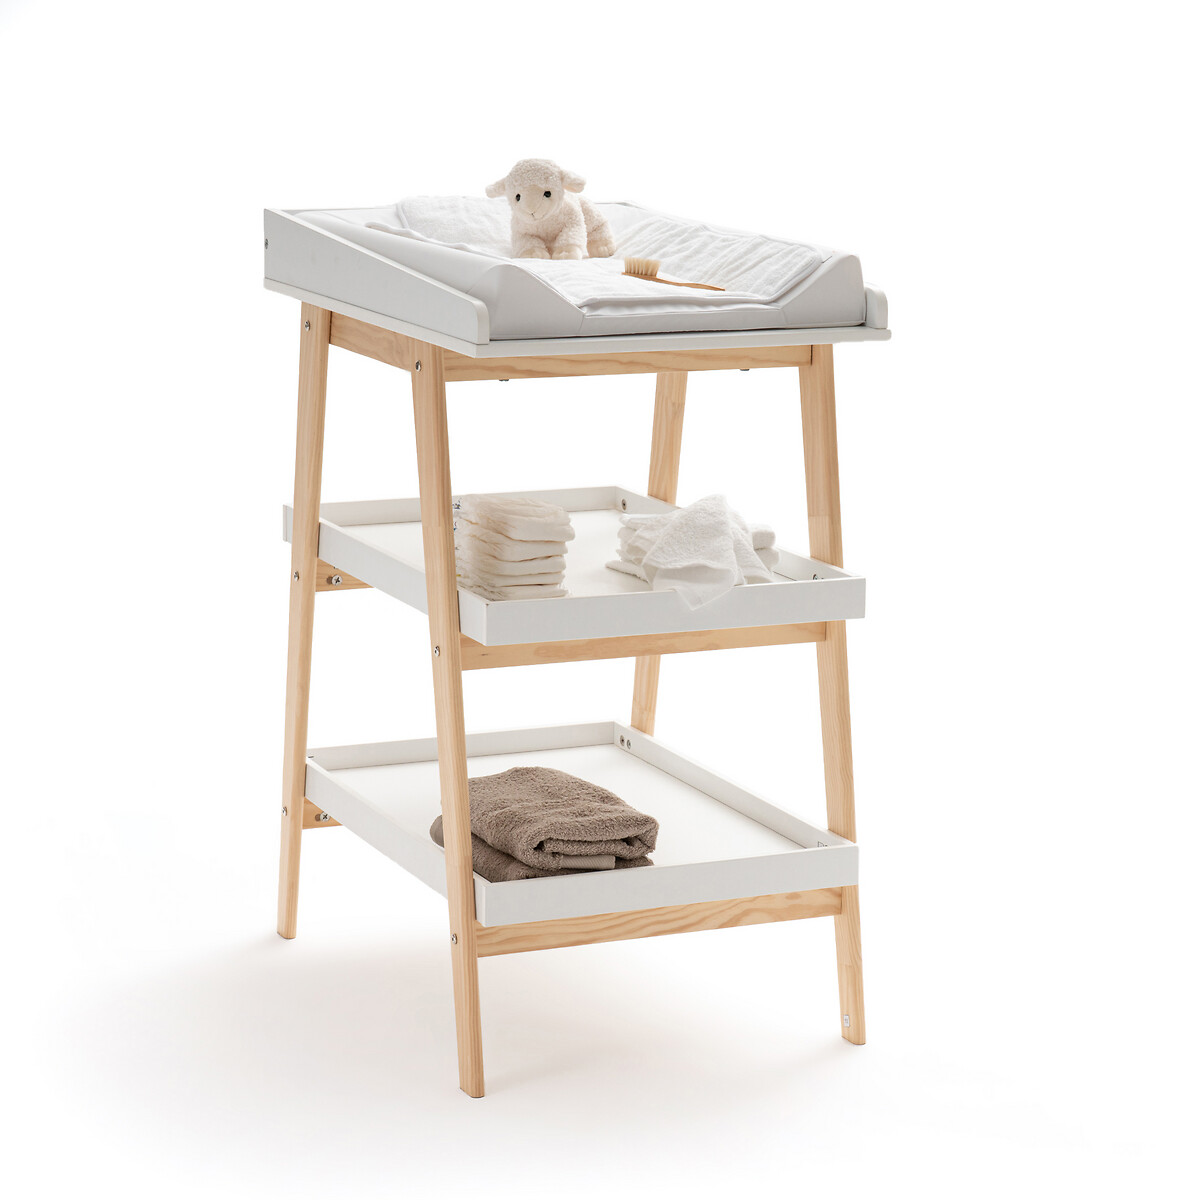 Oréade Changing Table by La Redoute